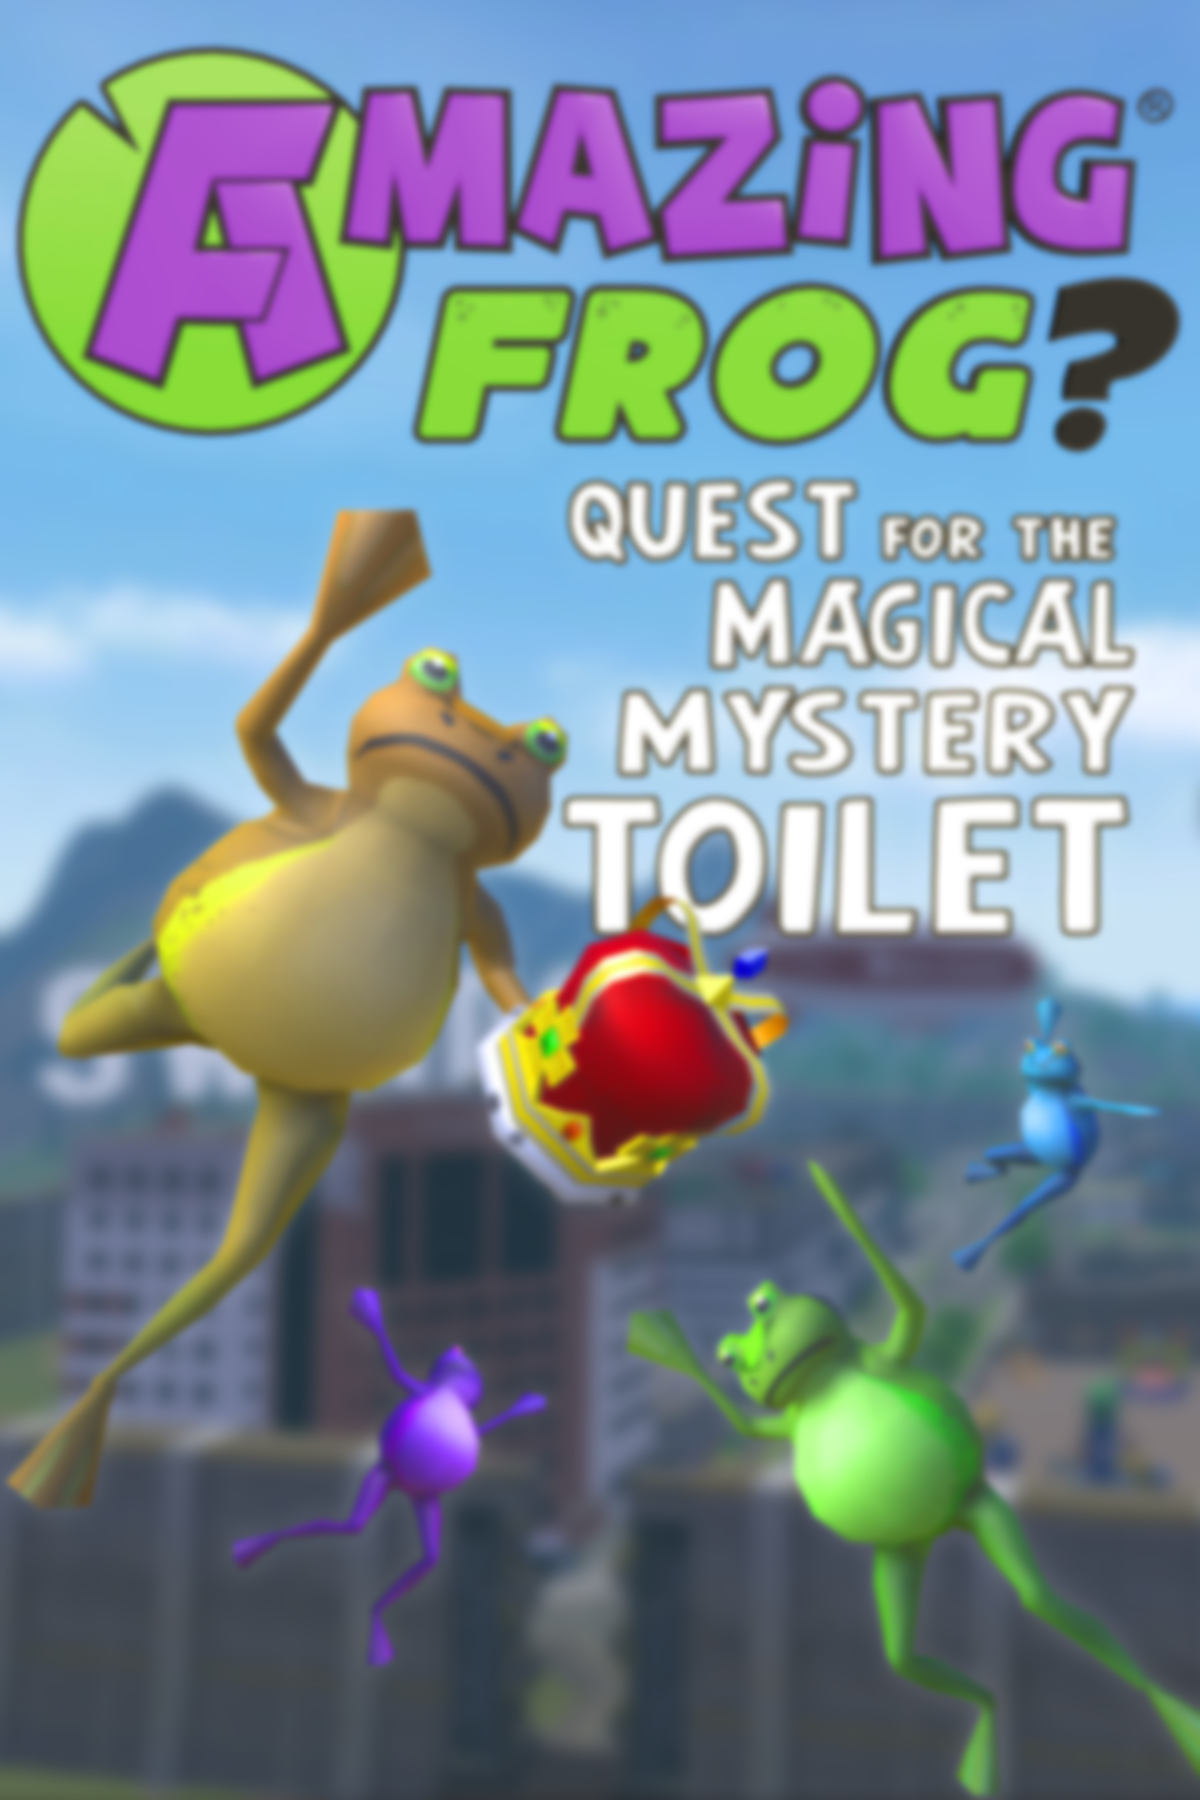 Amazing Frog? Quest For The Magical Mystery Toilet